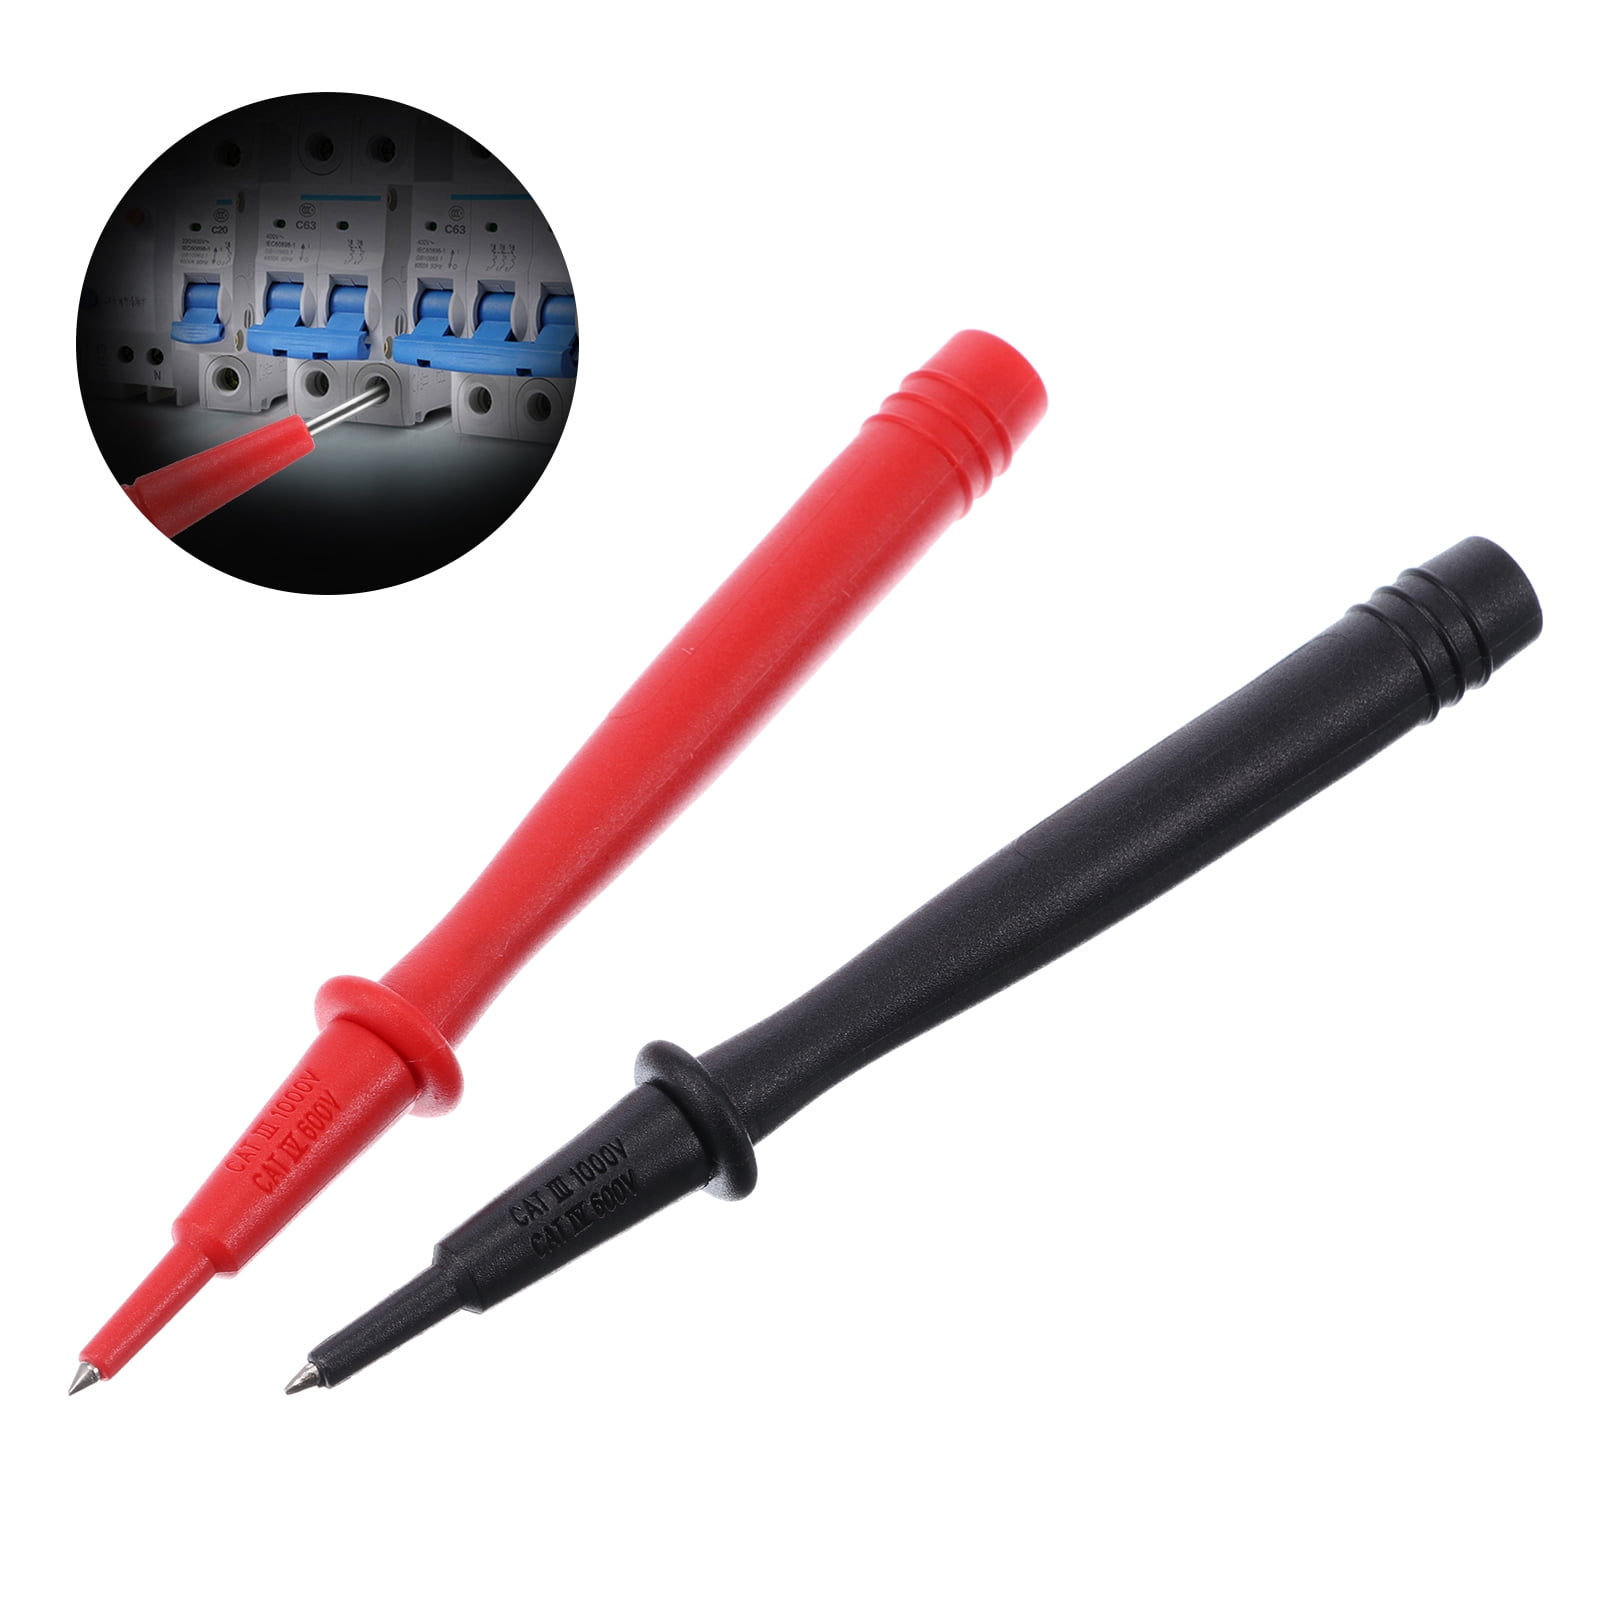 2pcs Multimeter Test Probe Pen 2mm Nickel Plated Copper Needle 4mm Banana Plug Connect Test Lead kit red Black 